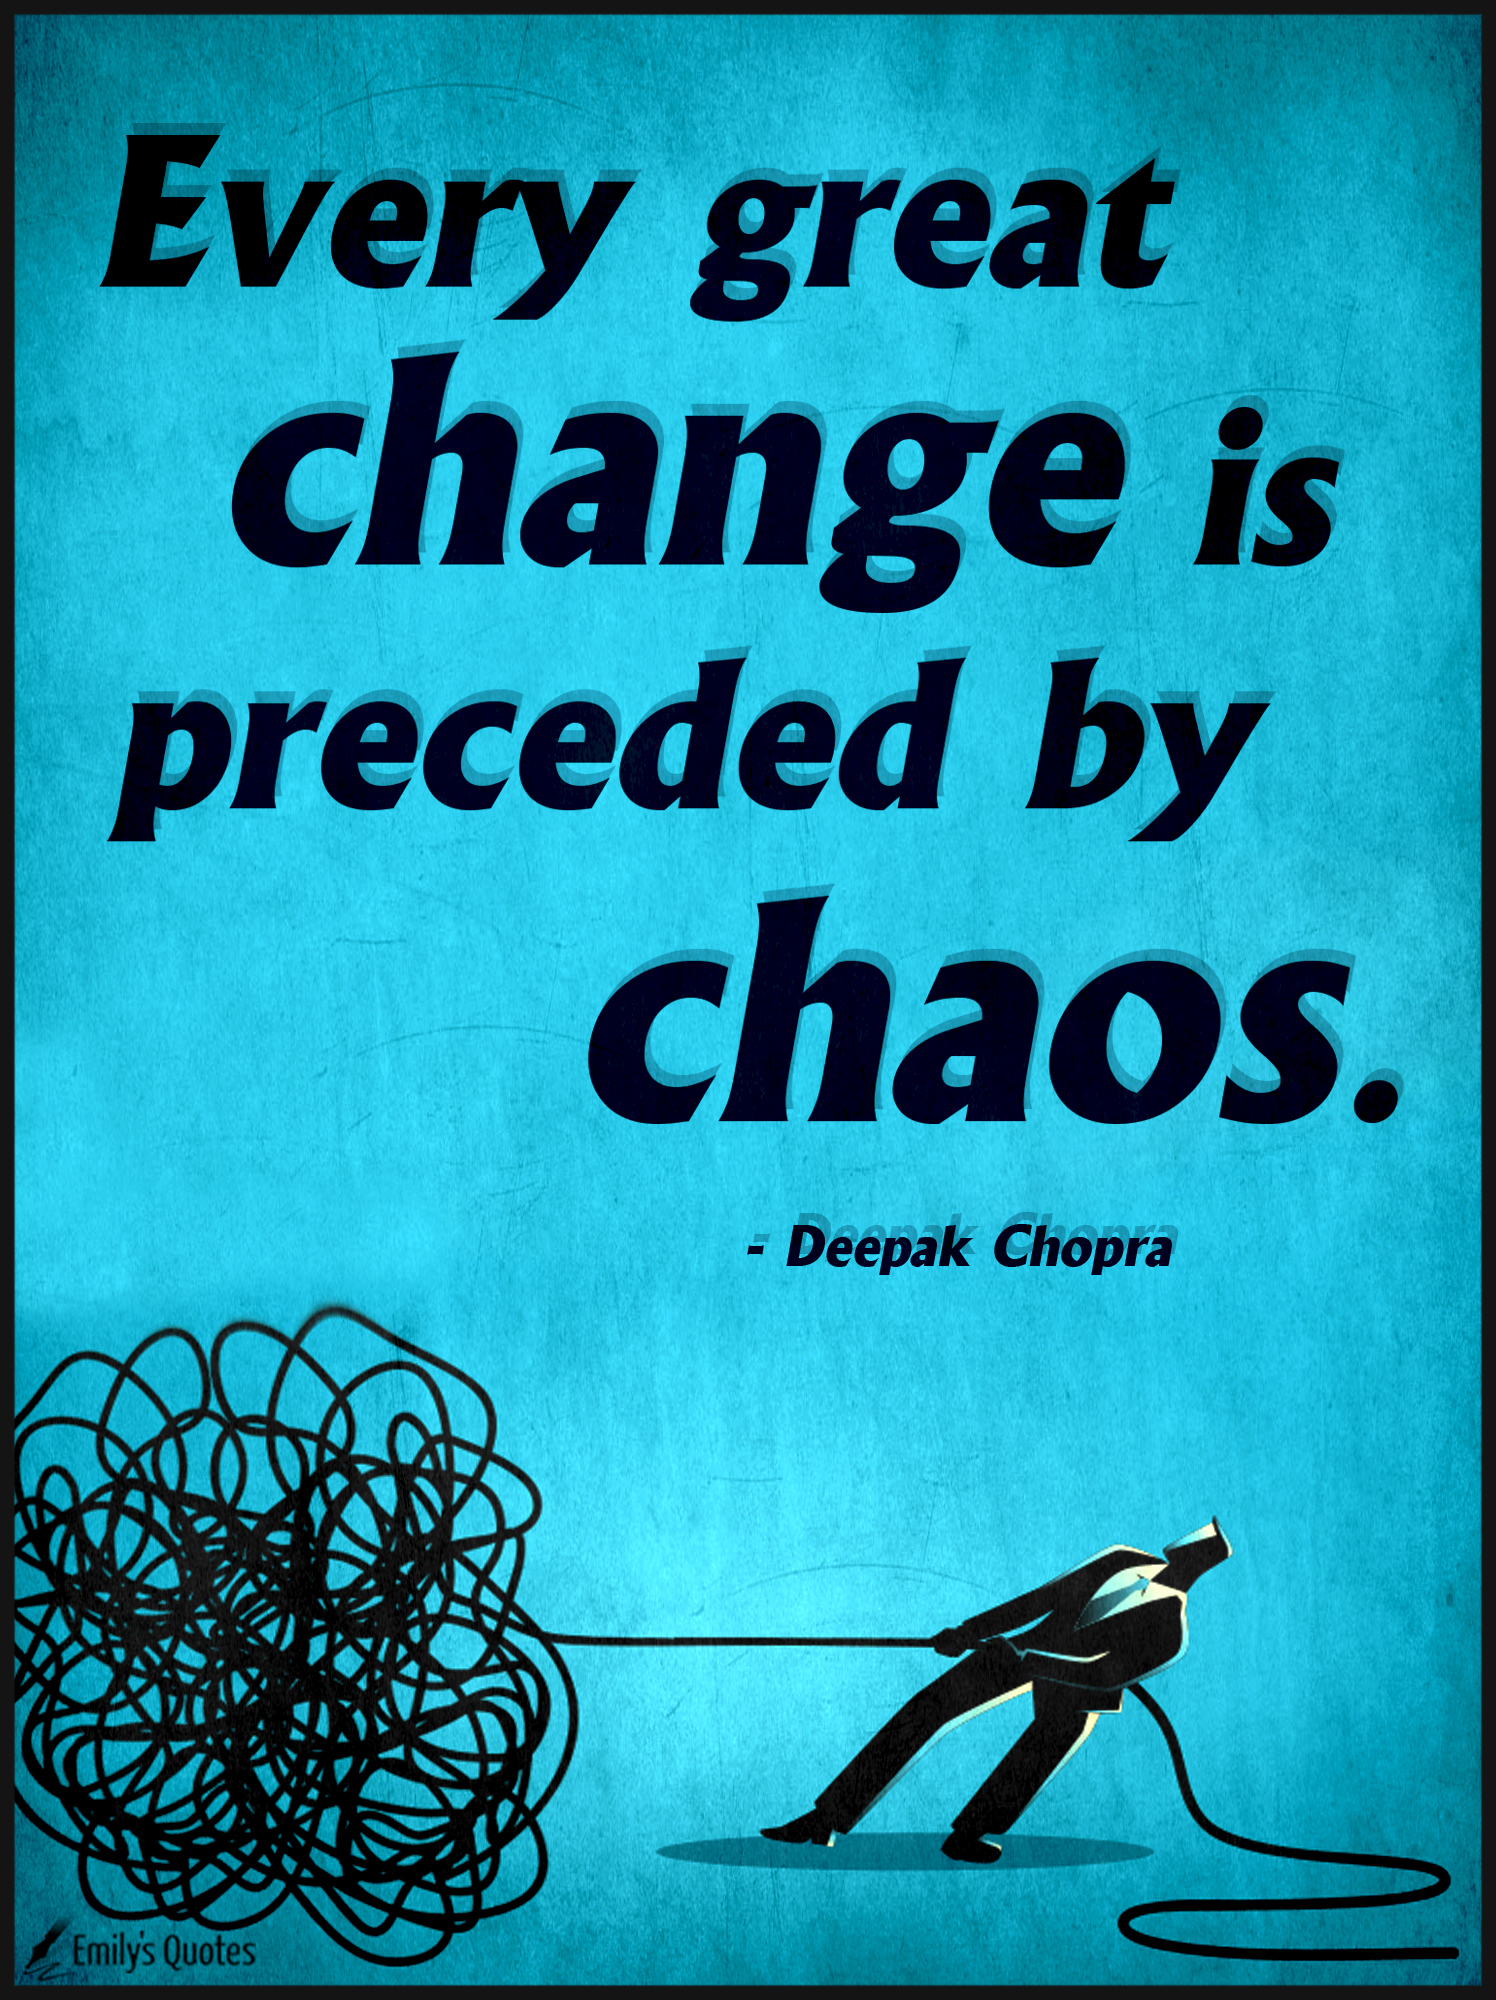 Every great change is preceded by chaos